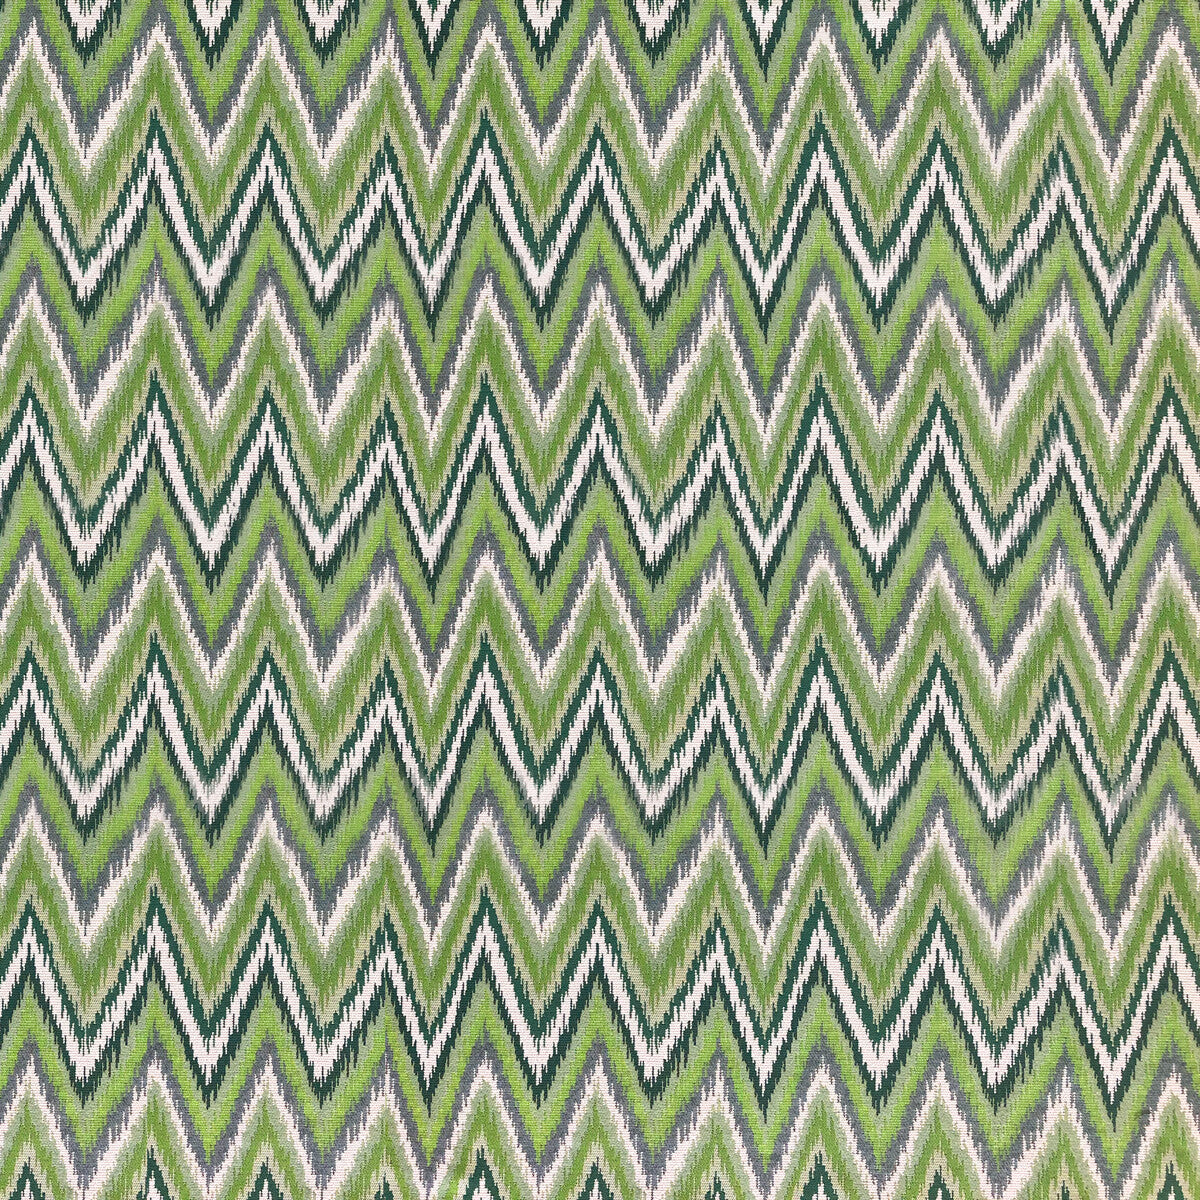 Gedeon fabric in verde/azul color - pattern LCT1047.001.0 - by Gaston y Daniela in the Lorenzo Castillo VI collection